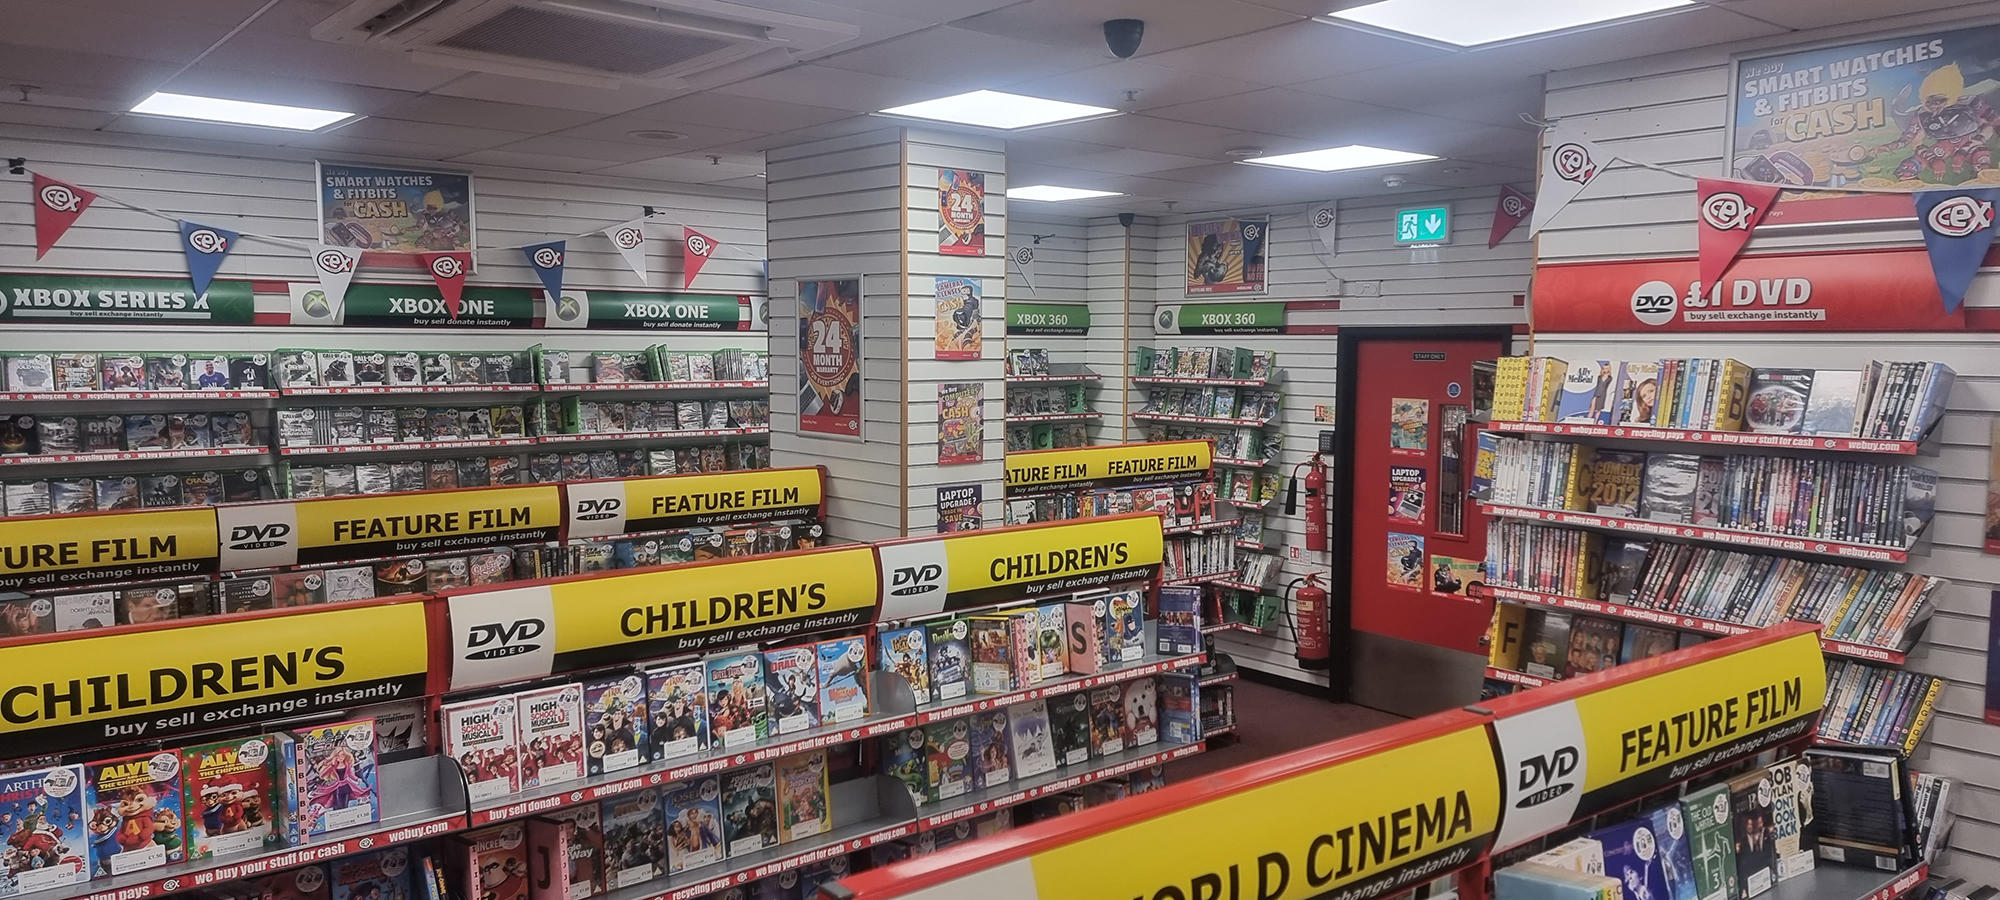 CeX Bootle 03301 235986